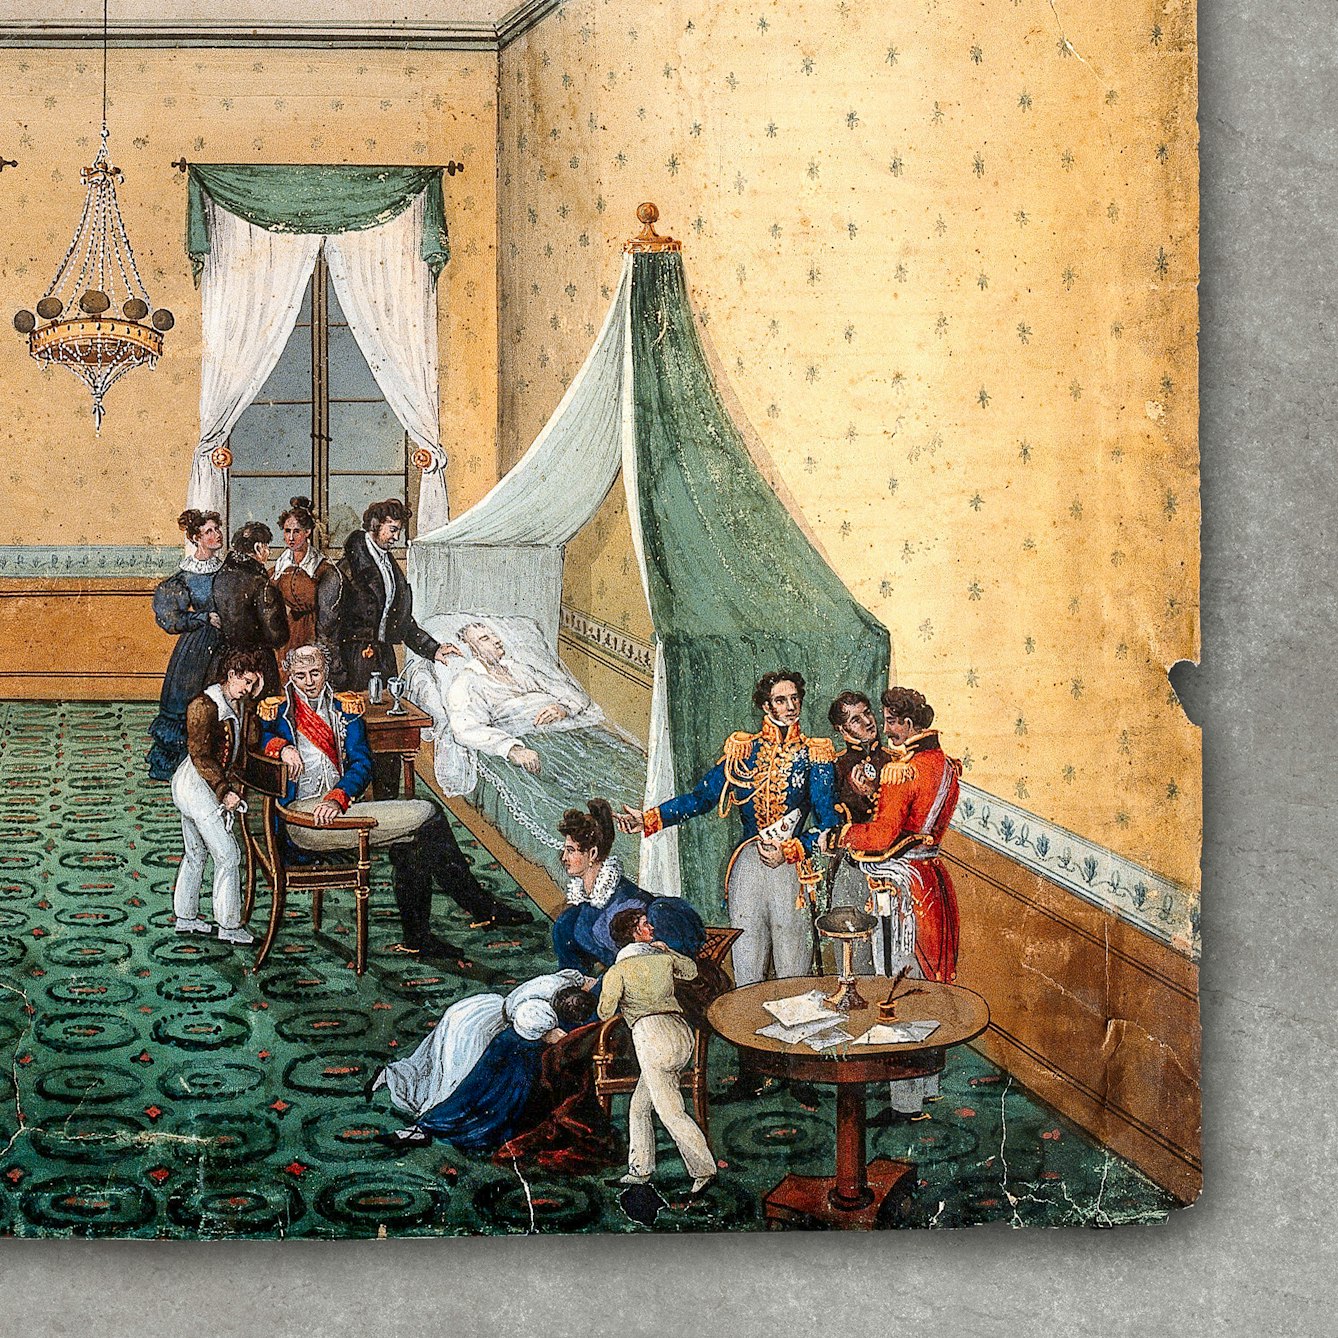 Photograph of a watercolour depicting the death of Napoleon Bonaparte. Napoleon is lying in bed surrounded by 12 people, some wearing military uniform. Three of these people are young children. One of the people stands at Napoleon's head, his hand resting on napoleon's shoulder. The bed is in a large room, with green patterned carpet and yellow wallpaper. A chandelier hangs from the high ceiling. The watercolour has been photographed against a grey concrete background.